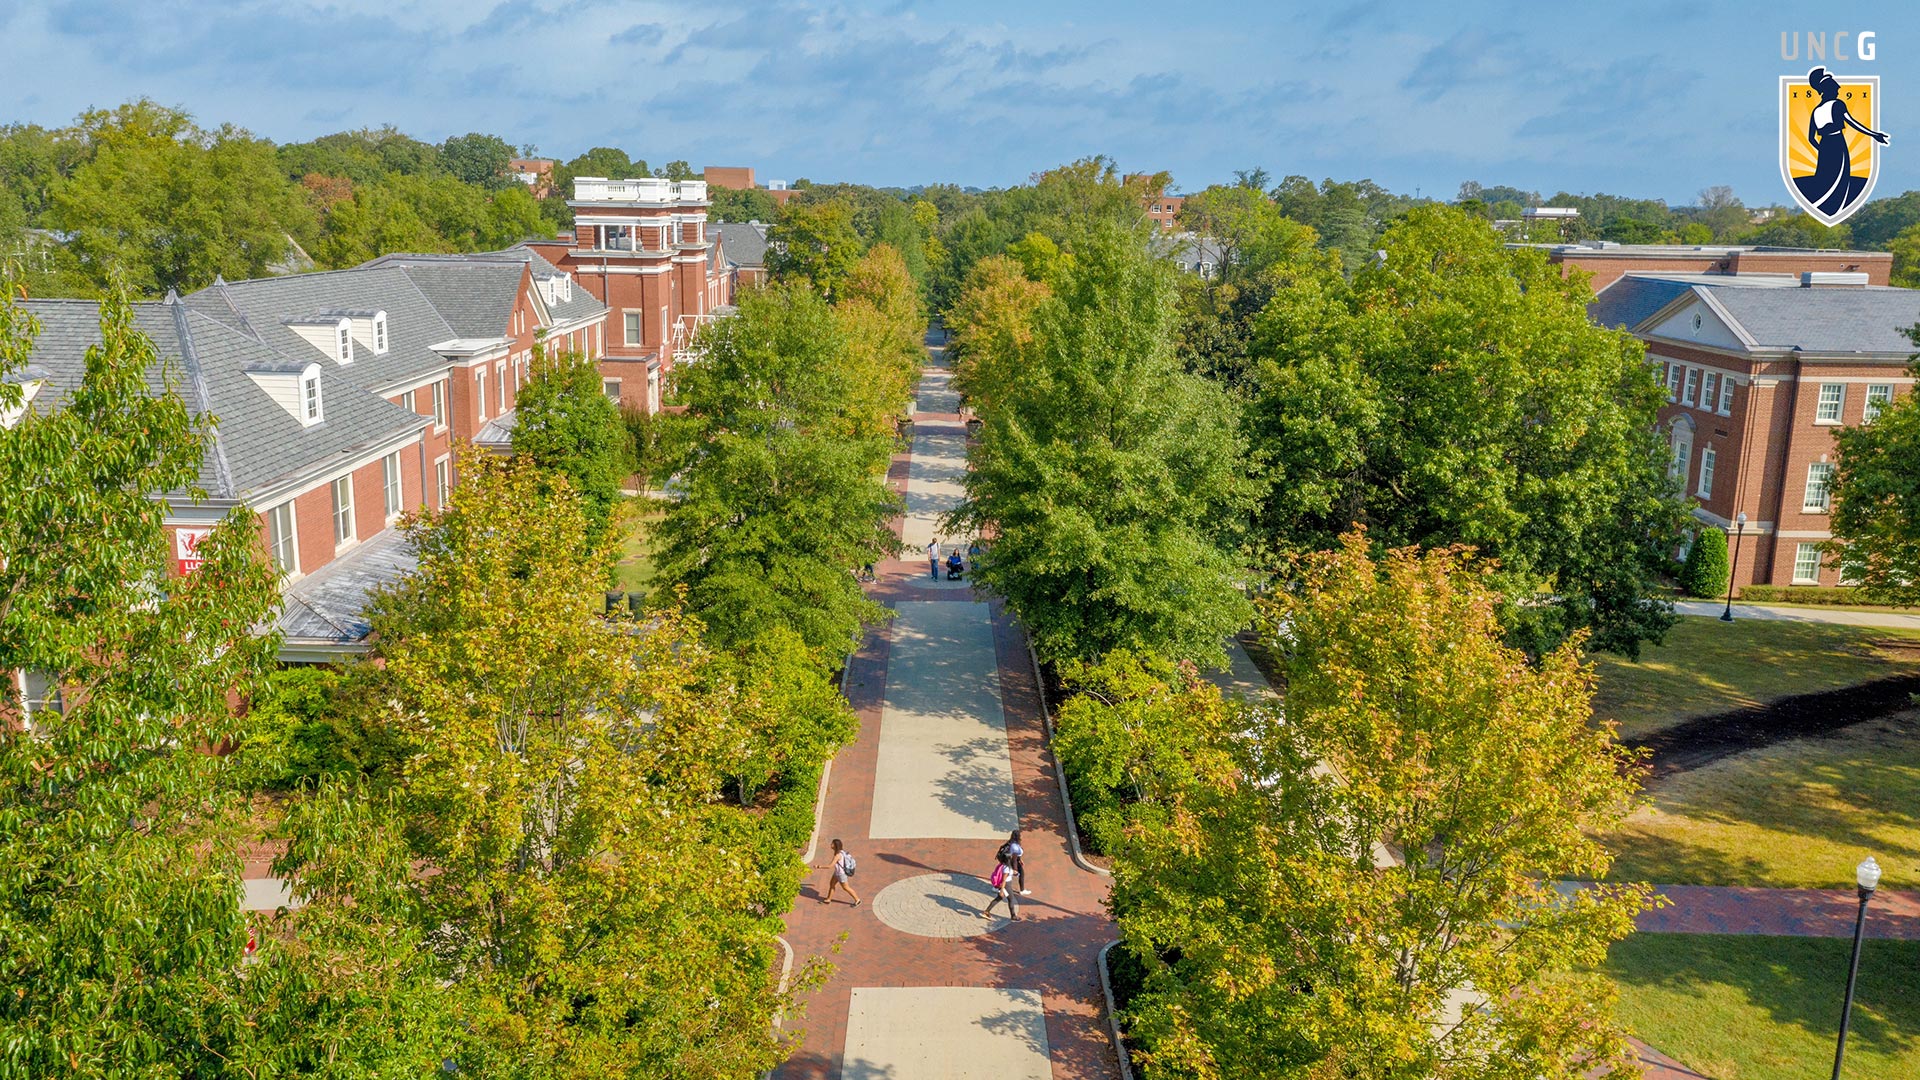 Aerial view of Collega Avenue with the UNCG logo in the top right corner